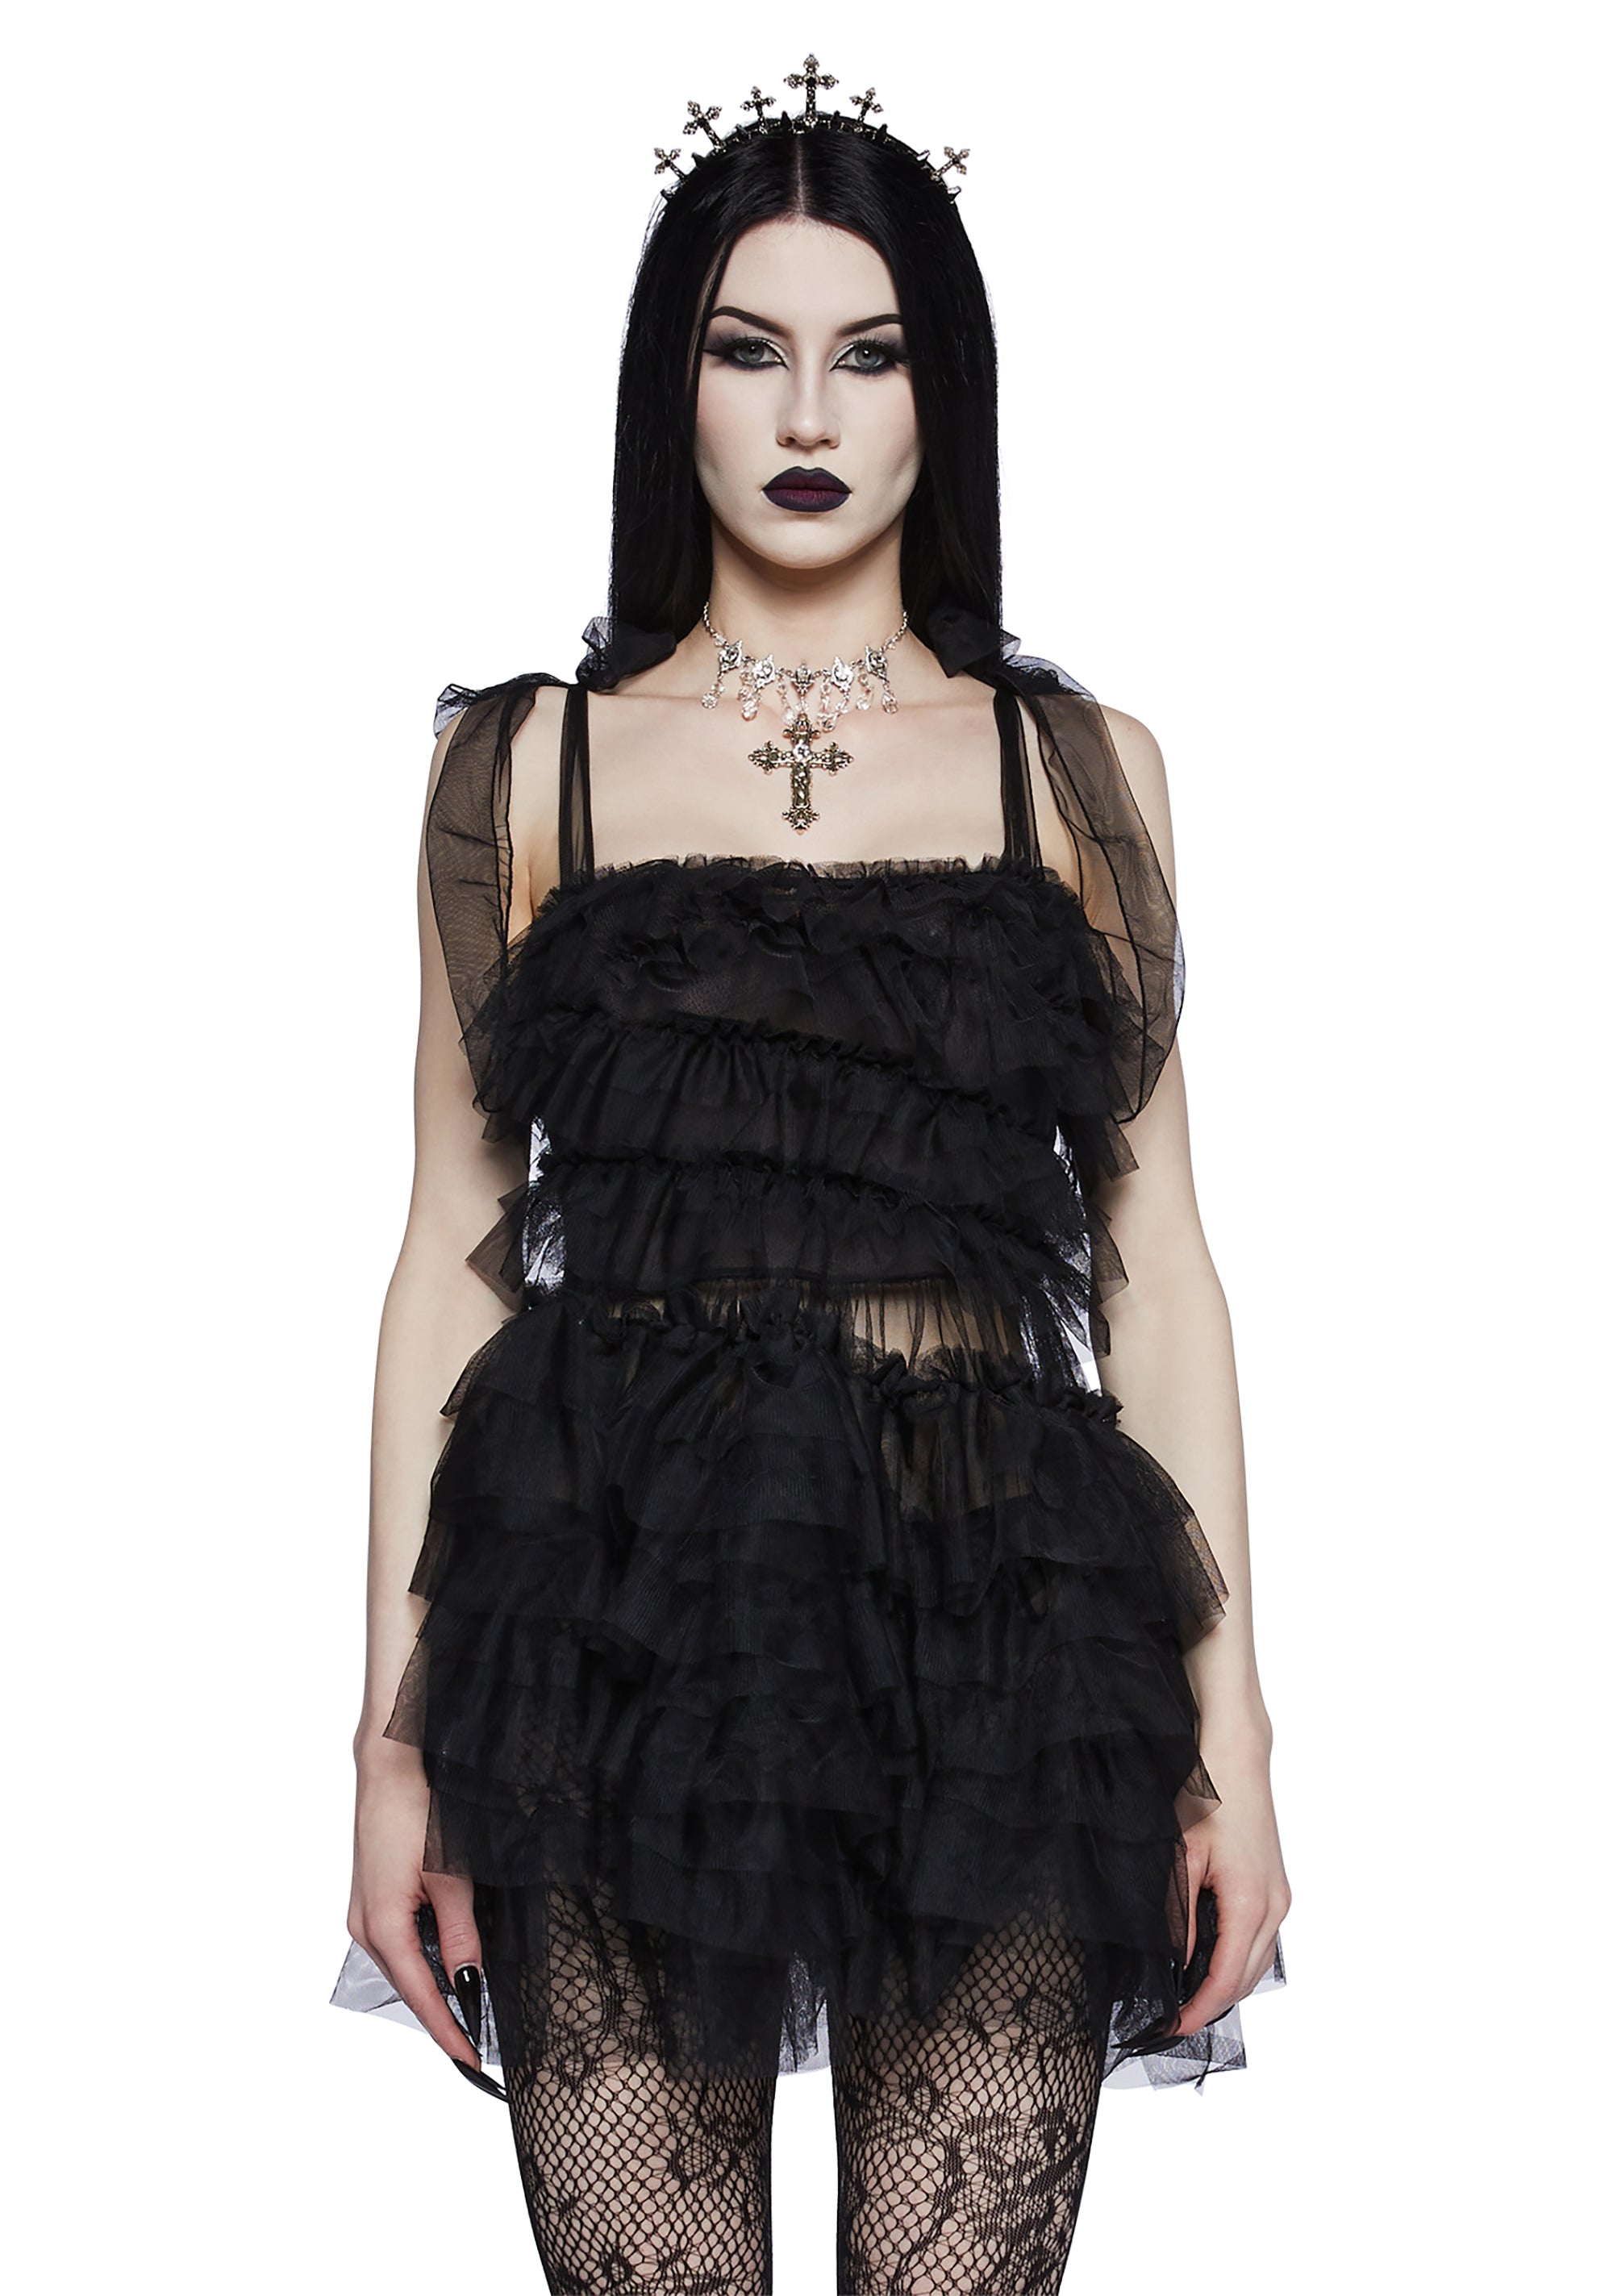 Shop the Best Alt Fashion Online: Pins & Bones - Your One-Stop Destination  for Goth, Punk, Rockabilly, and Emo Clothes and More!